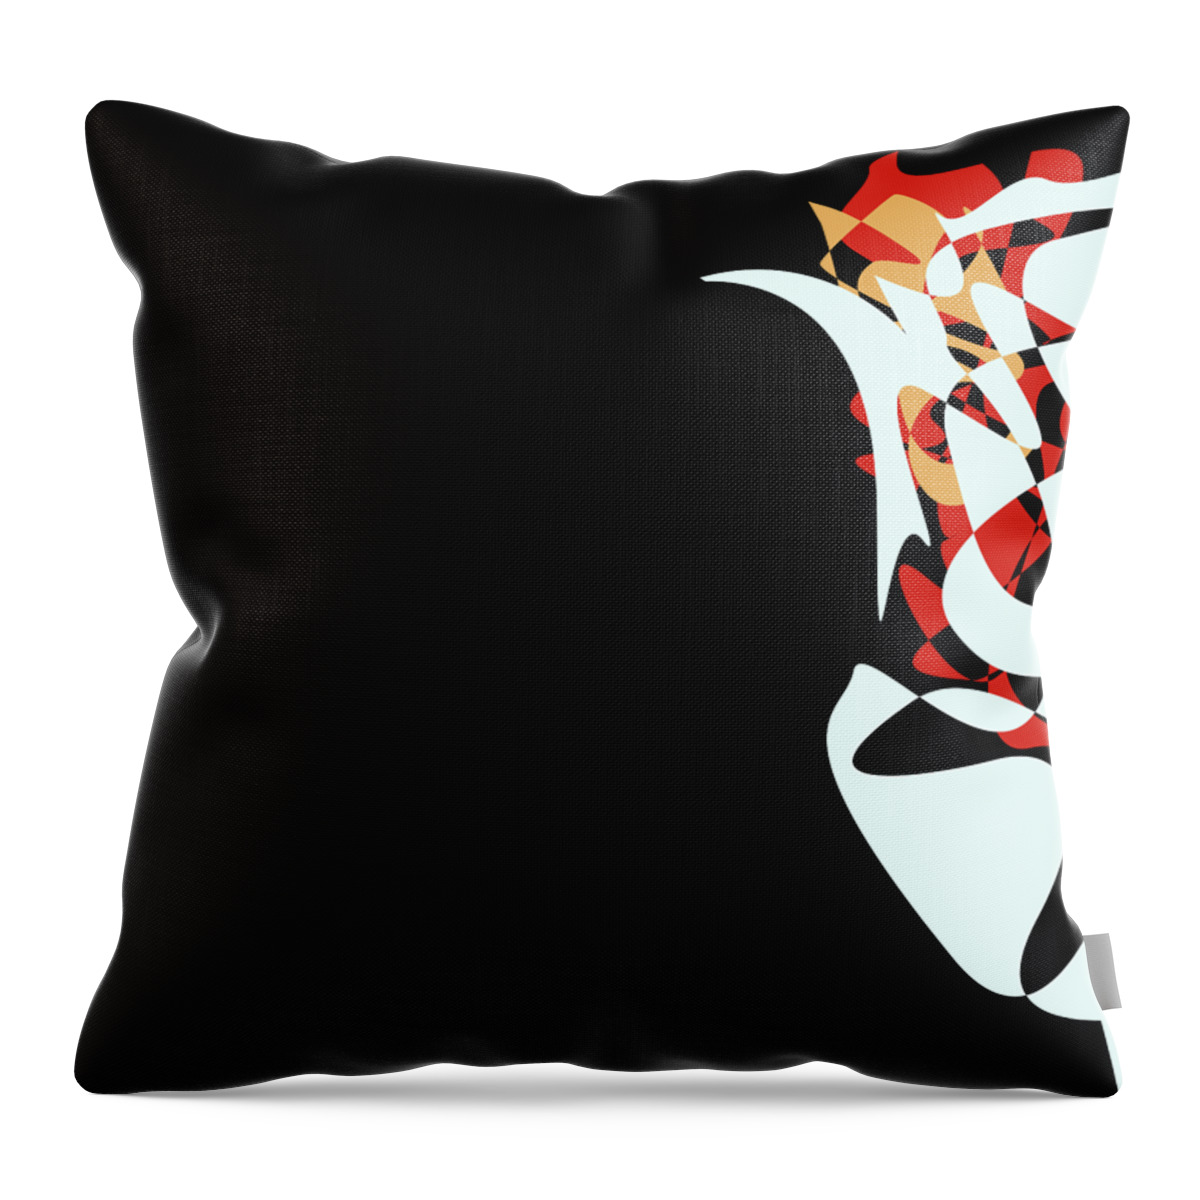 Abstract In The Living Room Throw Pillow featuring the digital art Abstract Flower 1 by David Bridburg